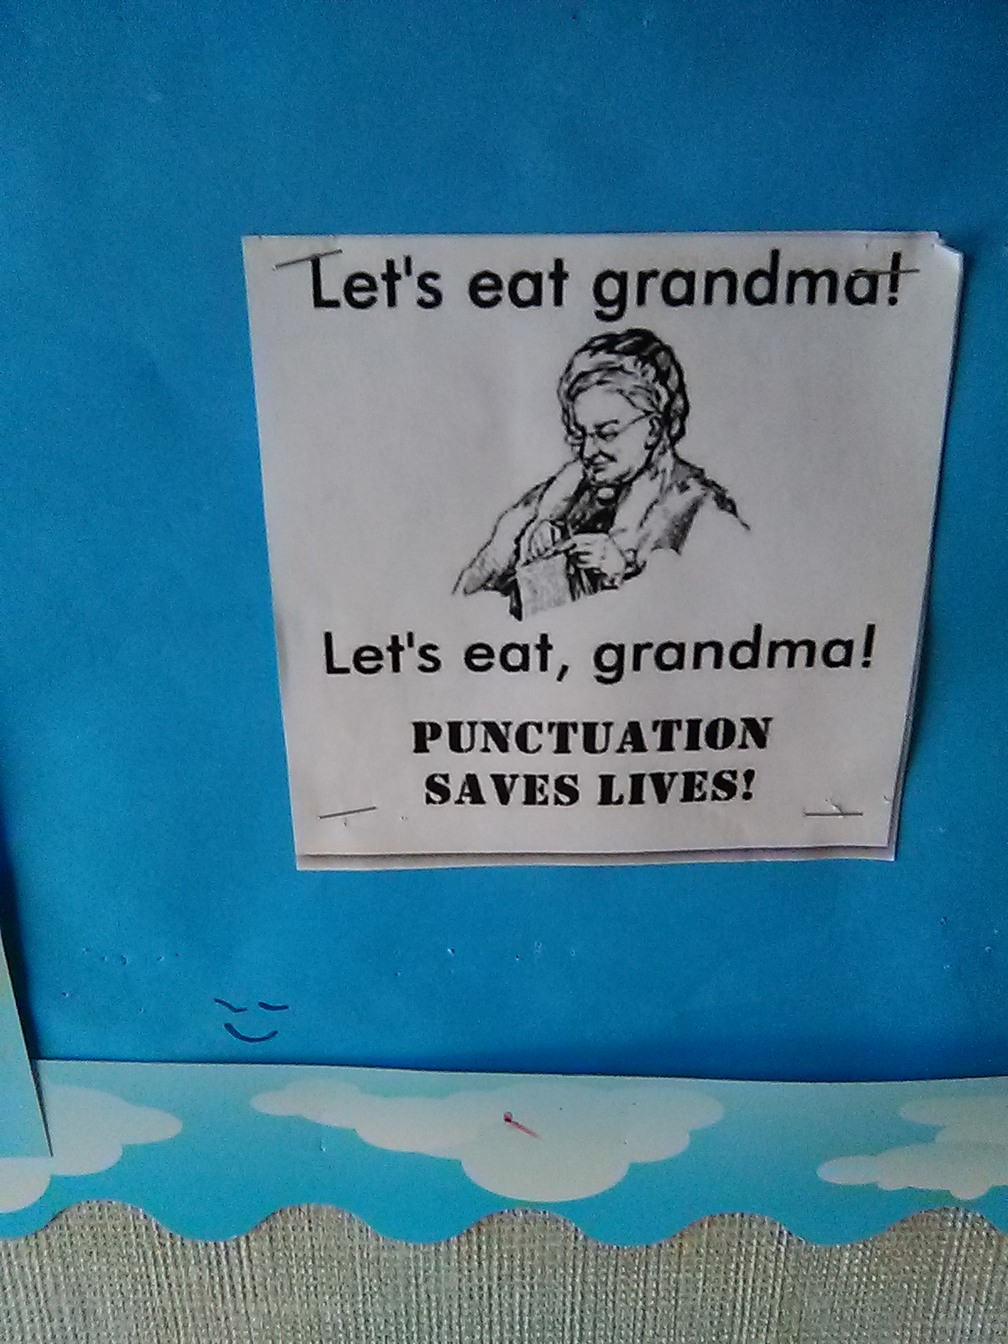 Found this in my class - meme